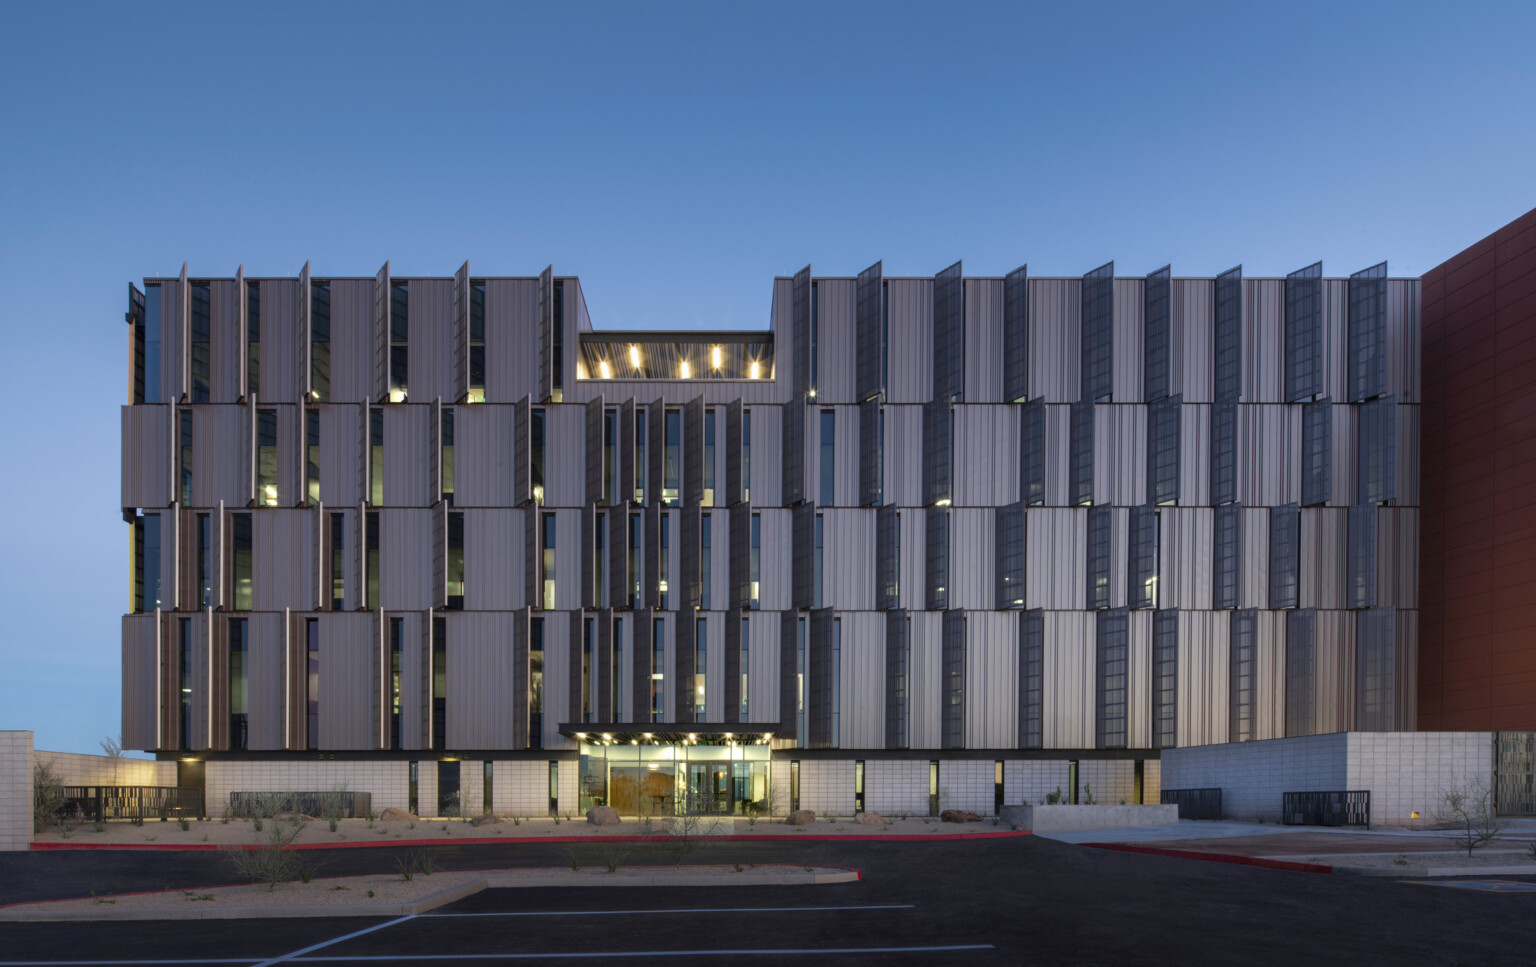 Dusk shot of Pinal County Attorney’s Offices, a serrated wrapped facade in alternating horizontal layers illuminated within